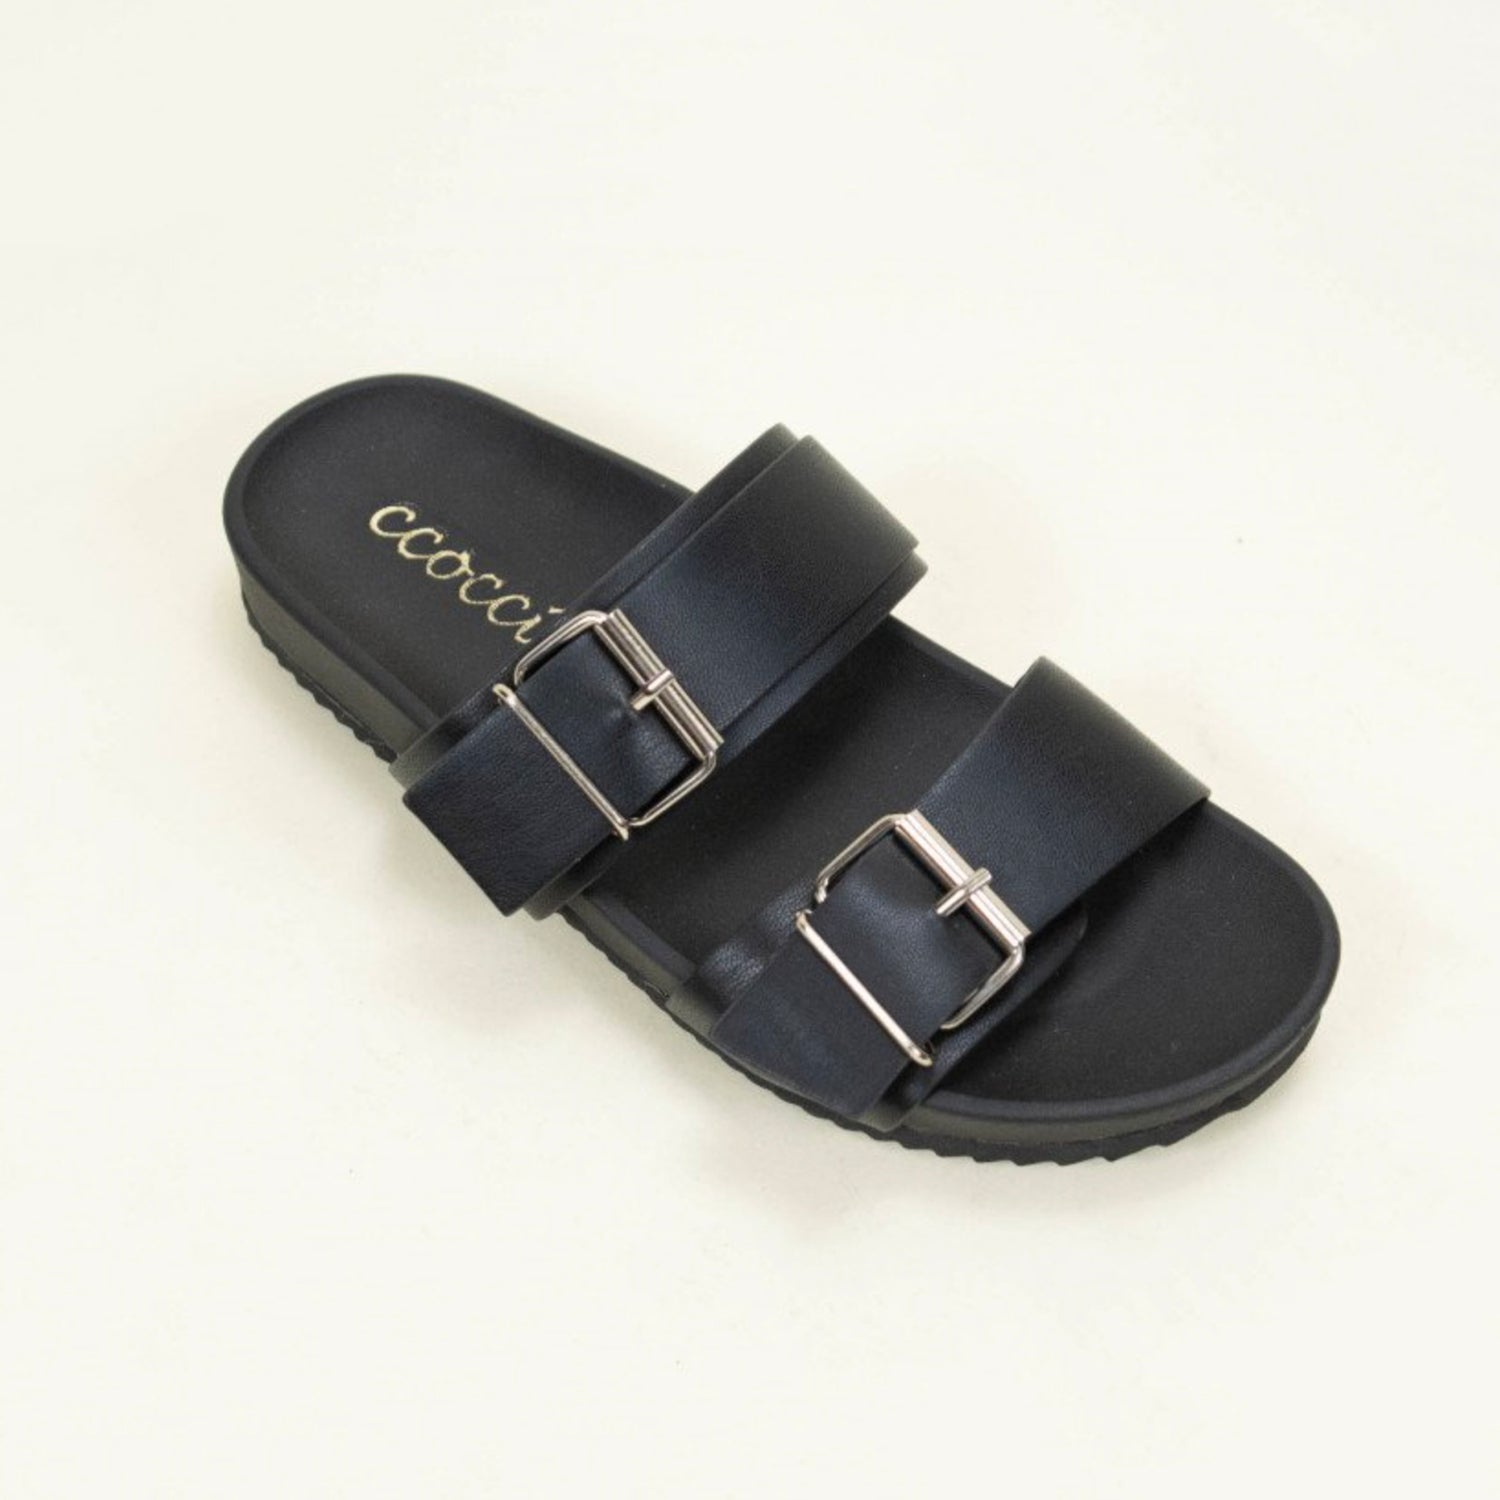 Rouge Sandal. Slip on these classic slides for a stylish update to your look. Cute and versatile, this sandal will become a go-to basic in your casual wardrobe